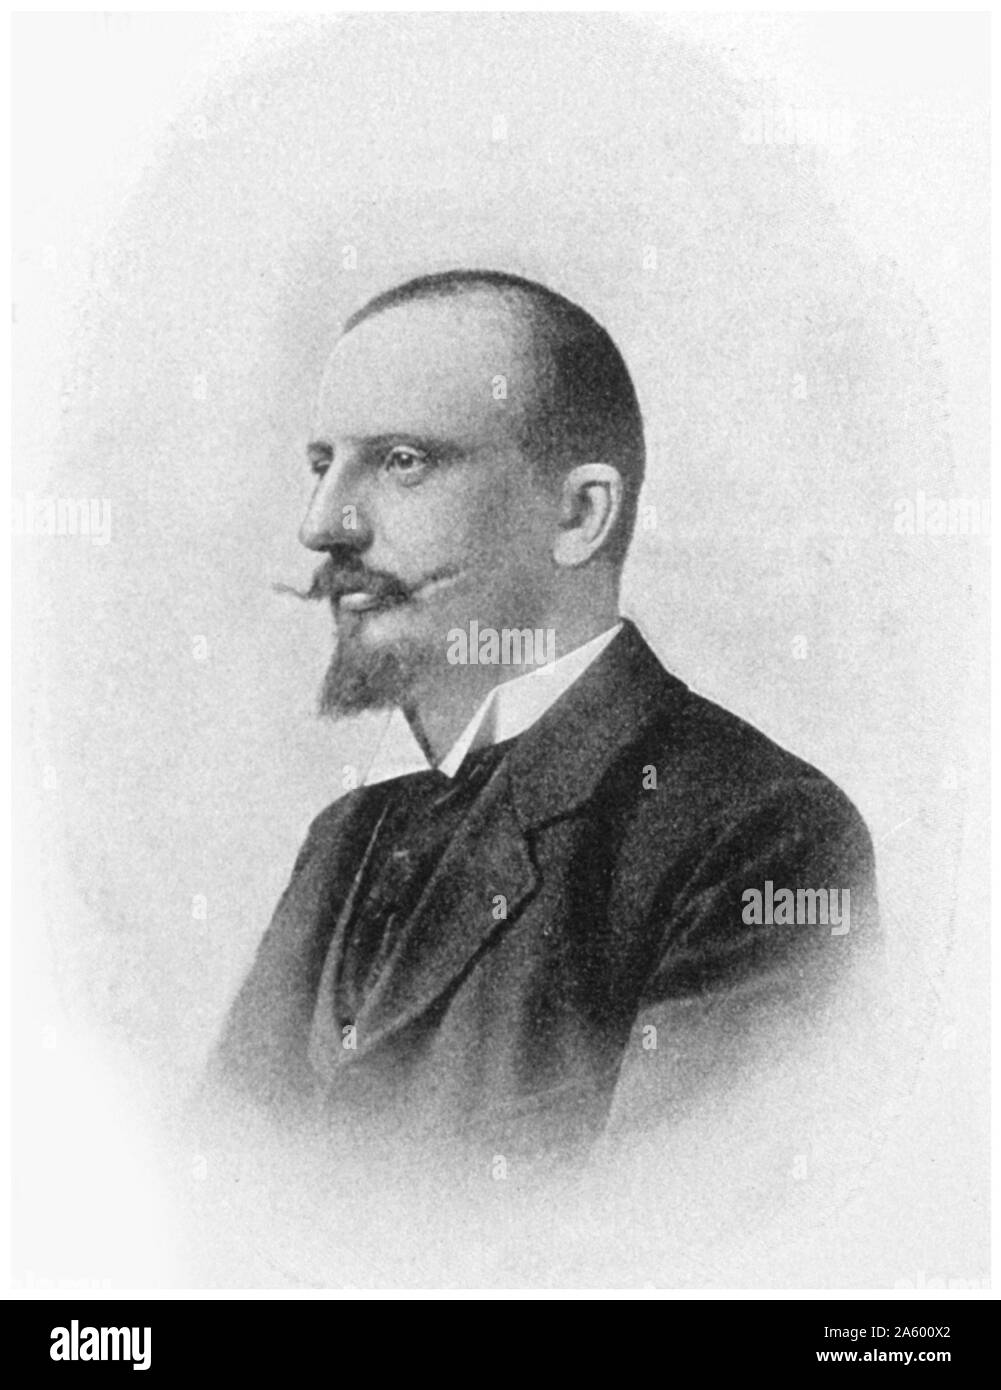 Dr. Martin Bachmann, physician and bacteriologist for the VALDIVIA Expedition, died January 14, 1899 Stock Photo